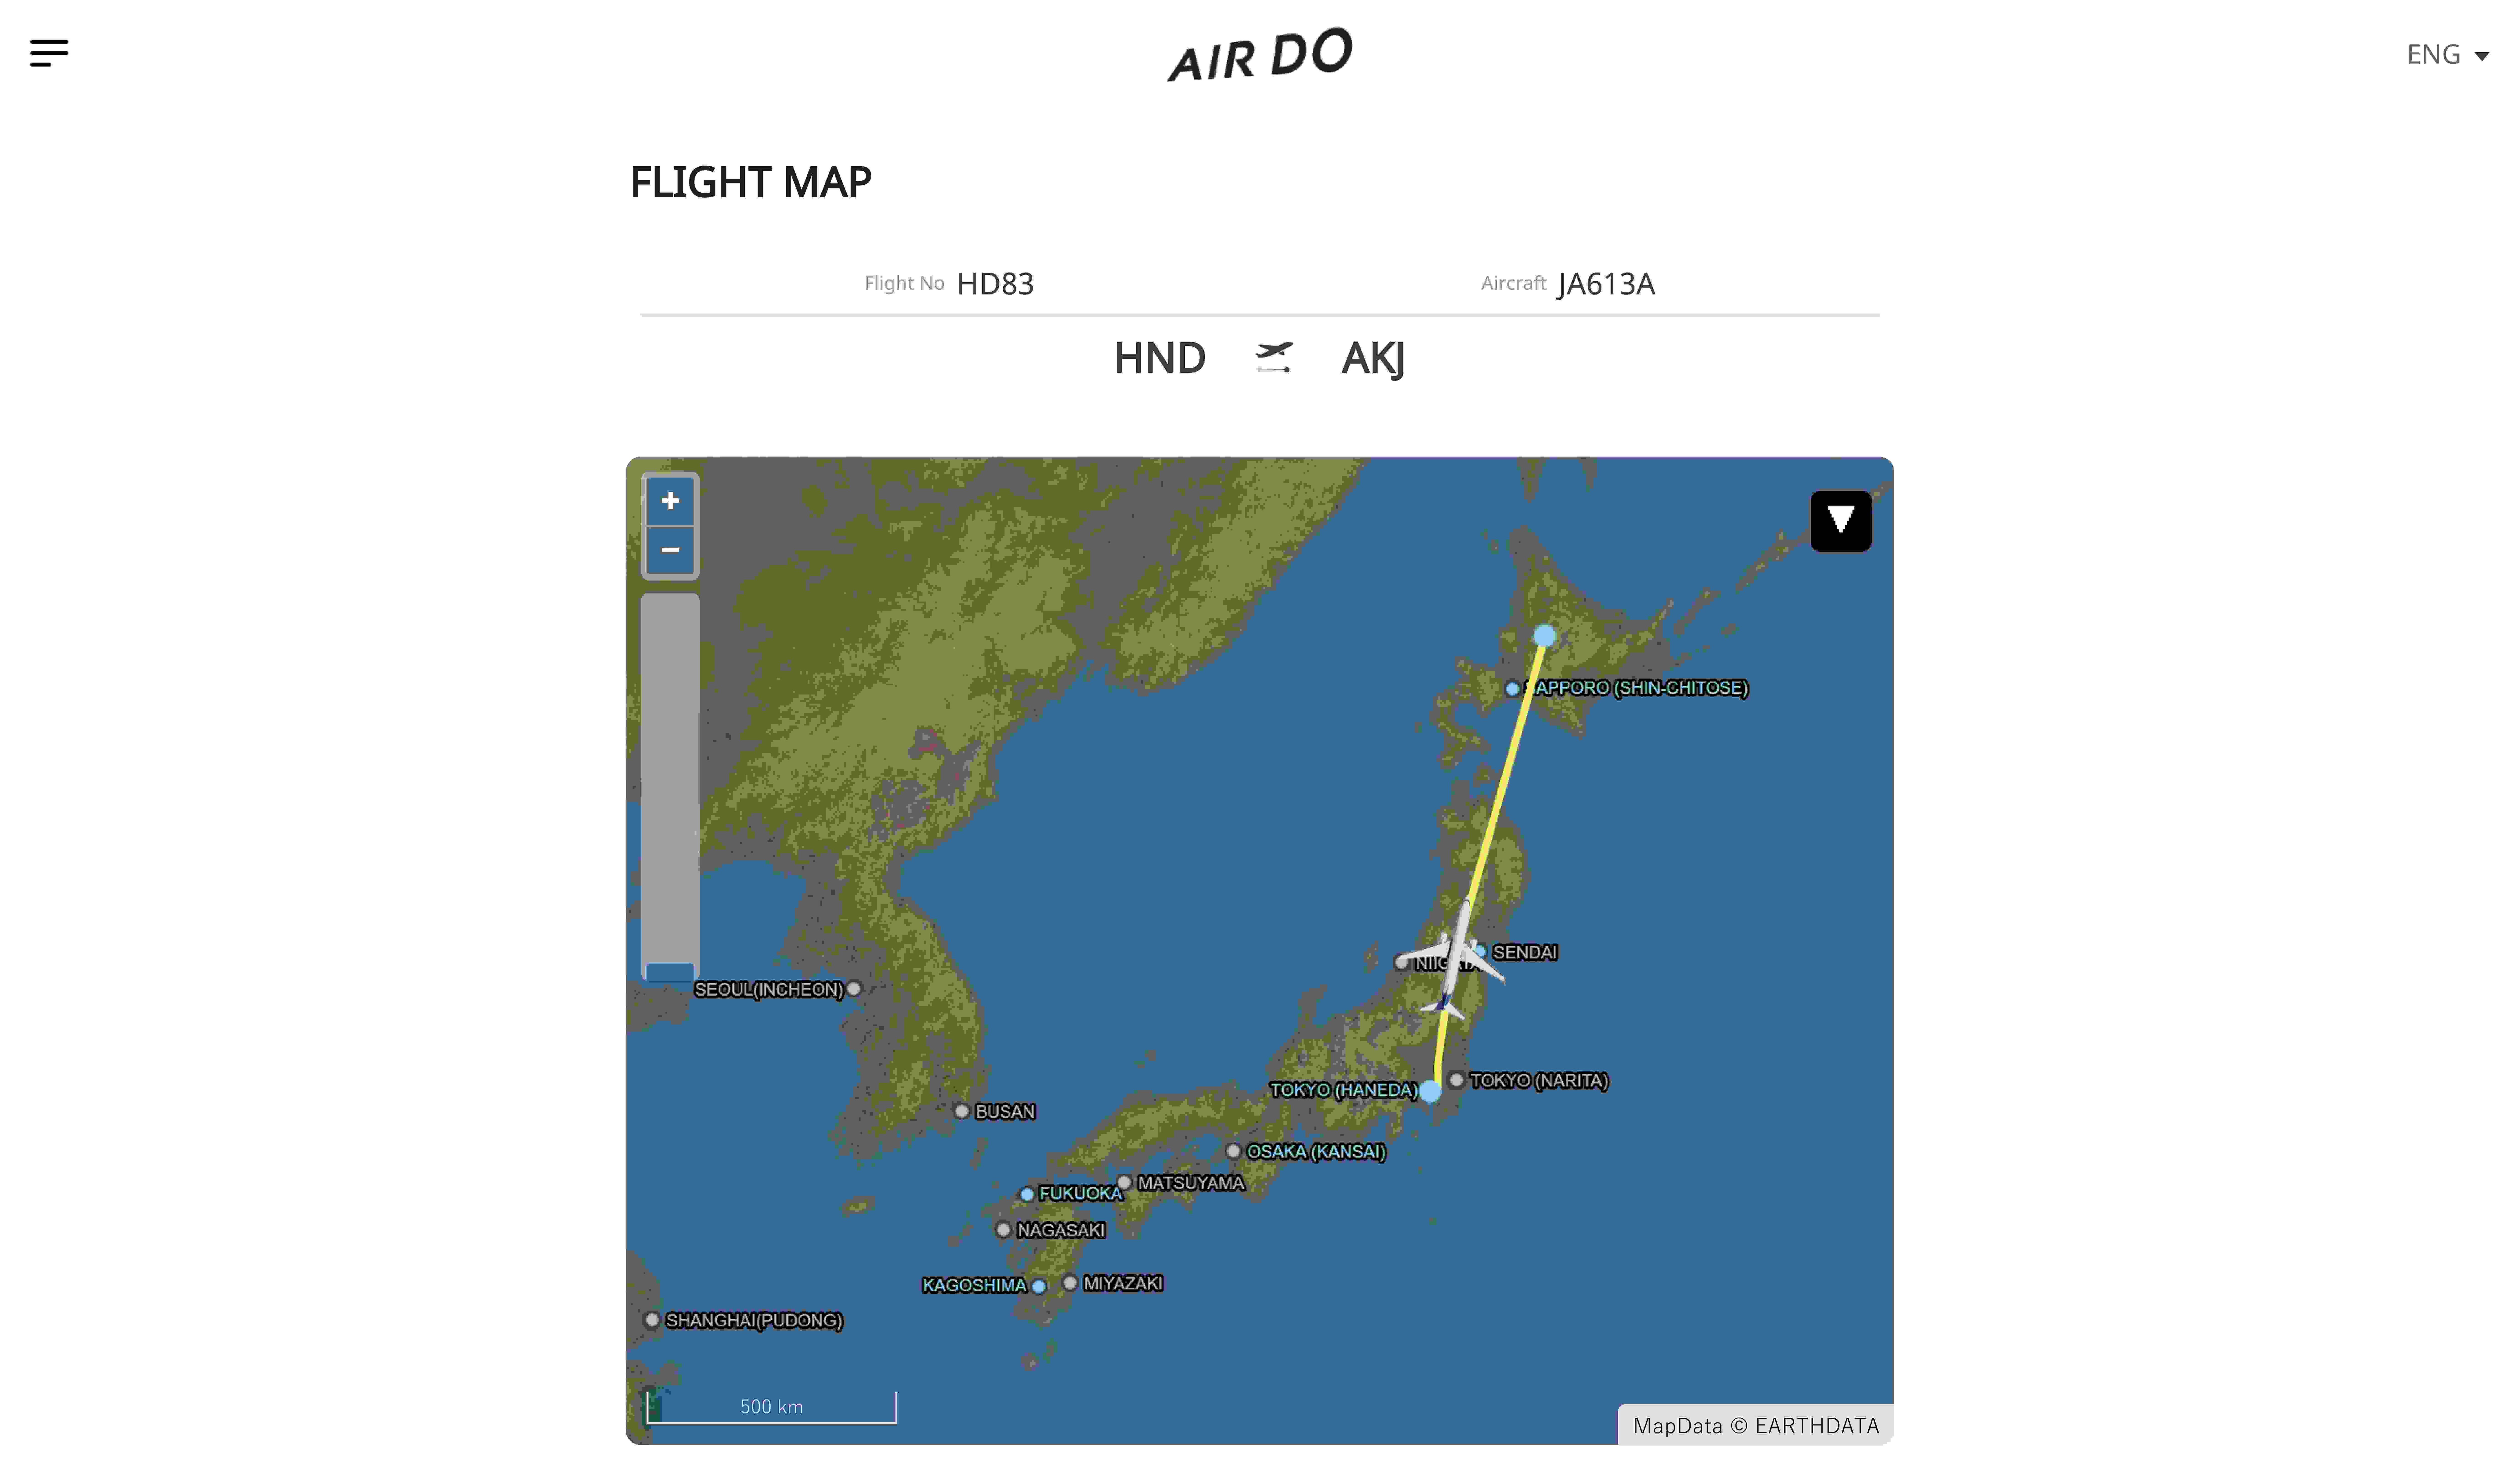 Flight map on the WiFi system